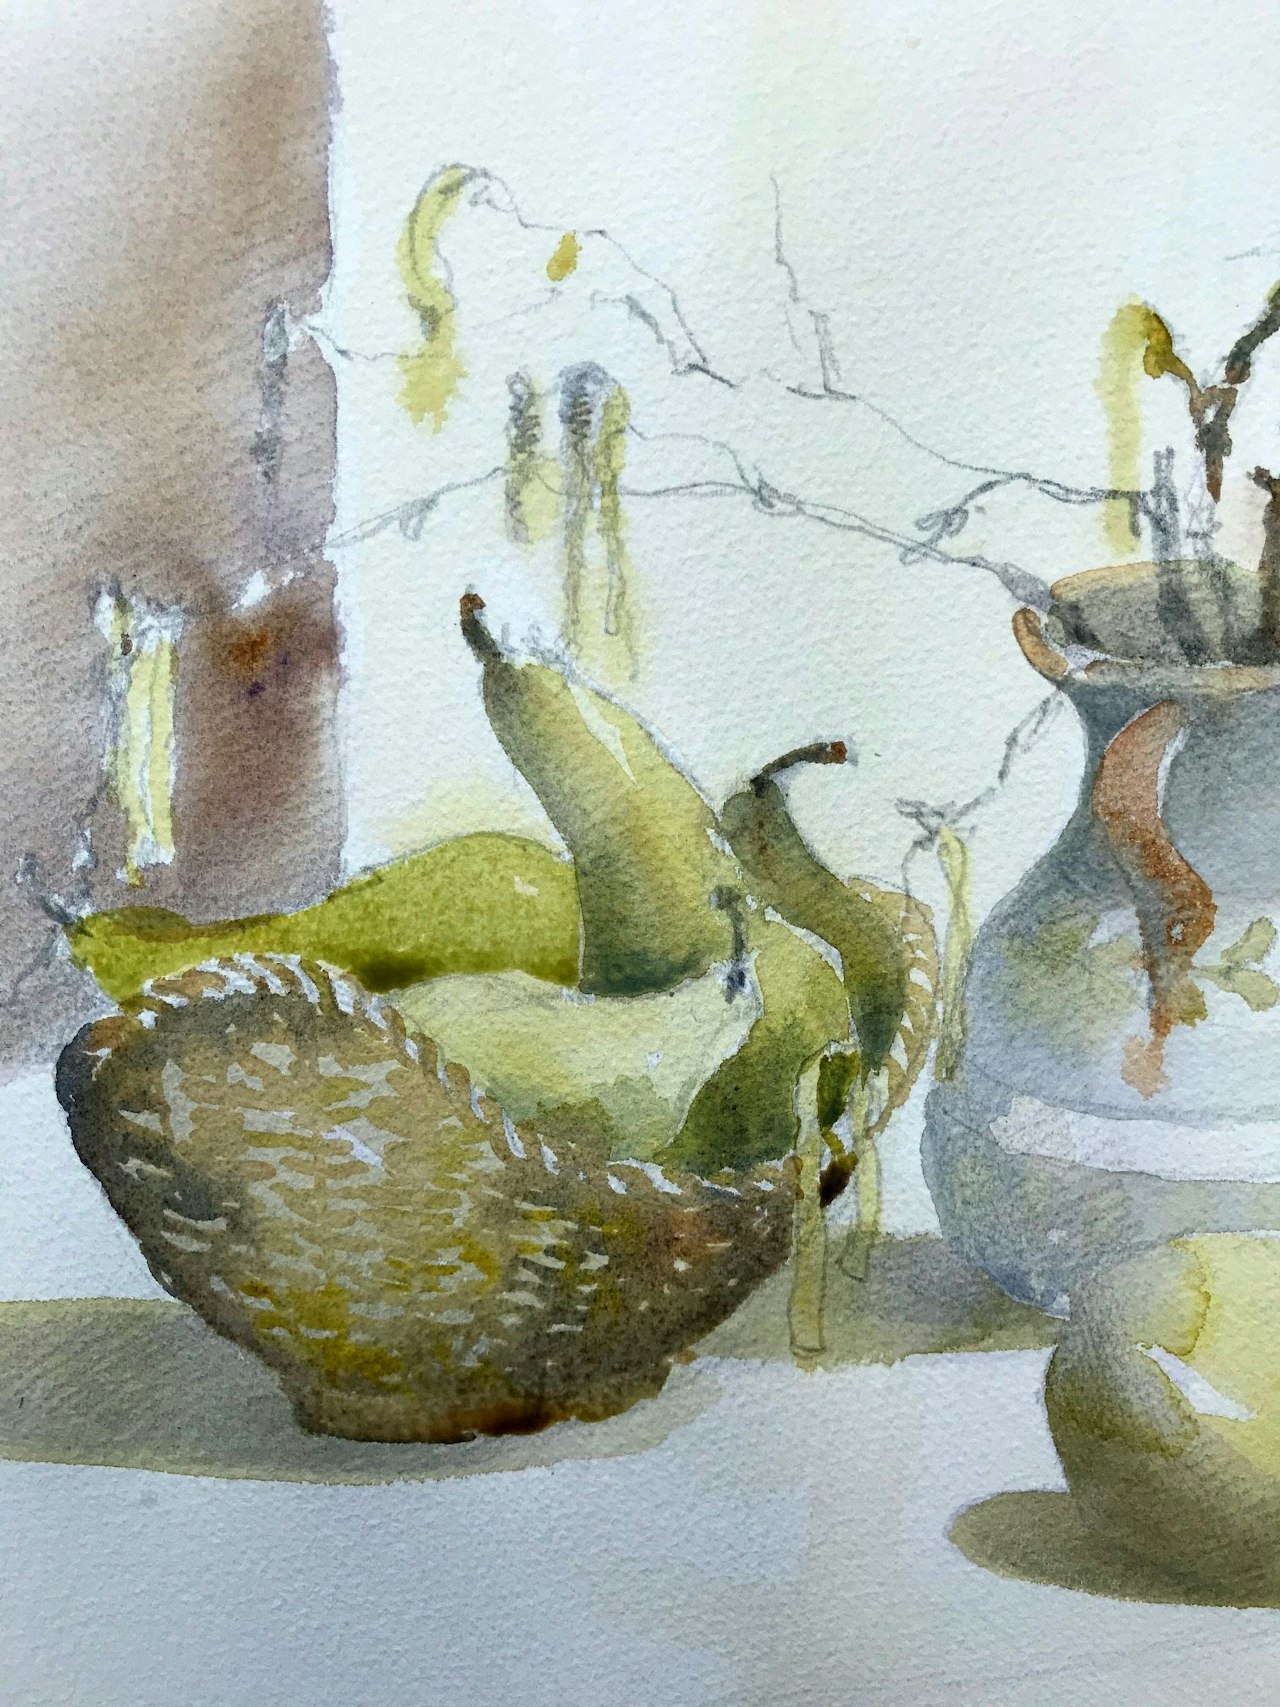 JJ5 Catkins and pears - initial washes. Final painting to follow shortly....